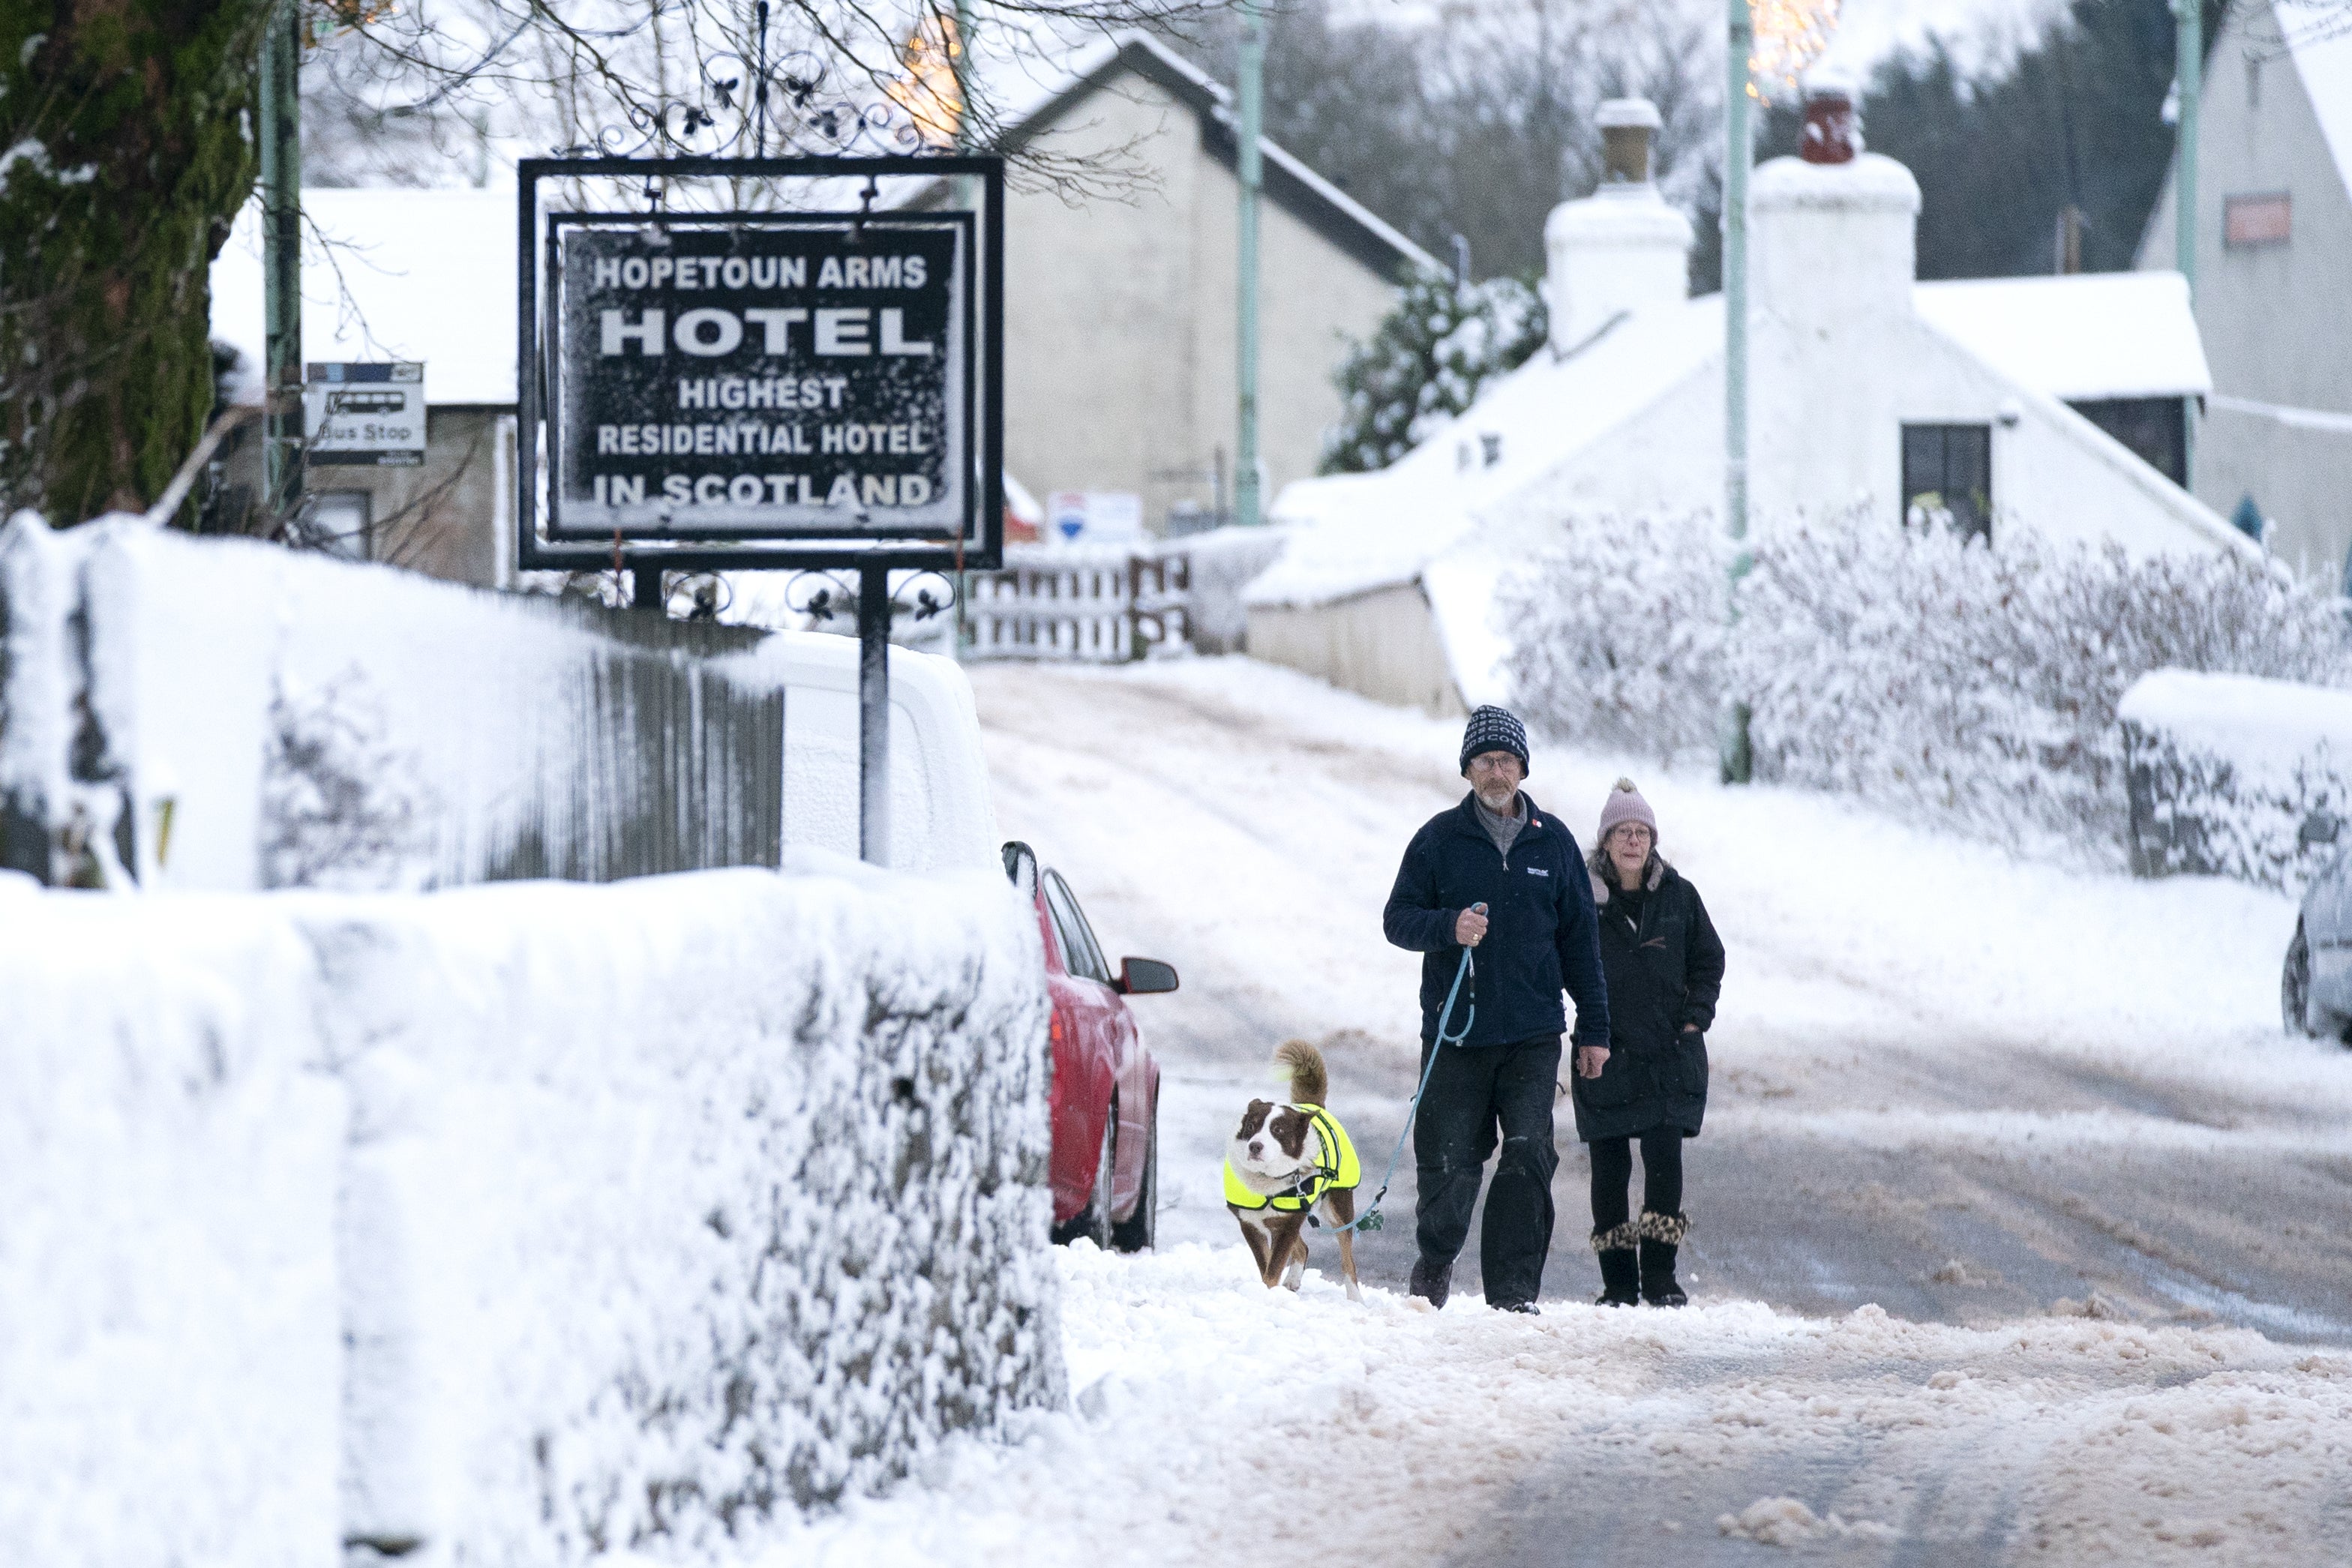 A couple walk their dog through the snow in Leadhills, South Lanarkshire as Storm Barra hits the UK and Ireland with disruptive winds, heavy rain and snow on Tuesday. Picture date: Tuesday December 7, 2021.